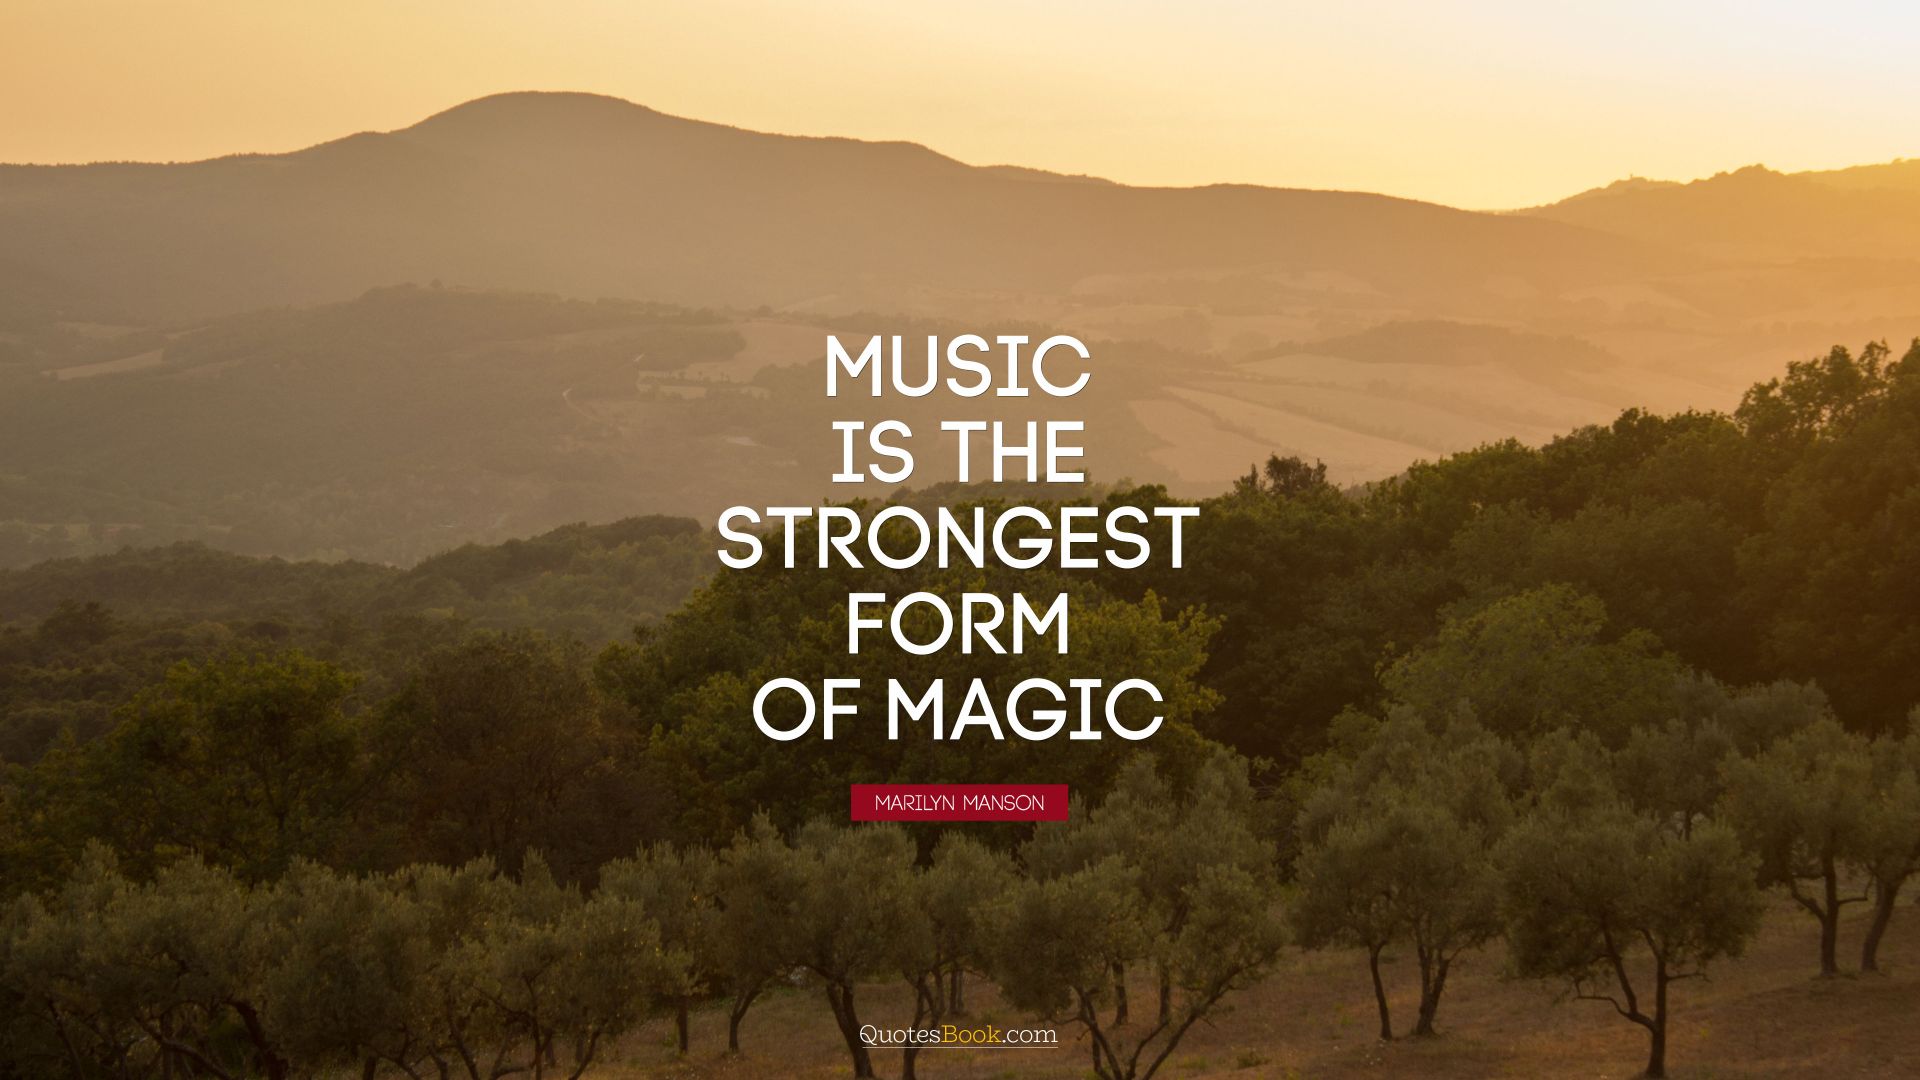 Music is the strongest form of magic. - Quote by Marilyn Manson